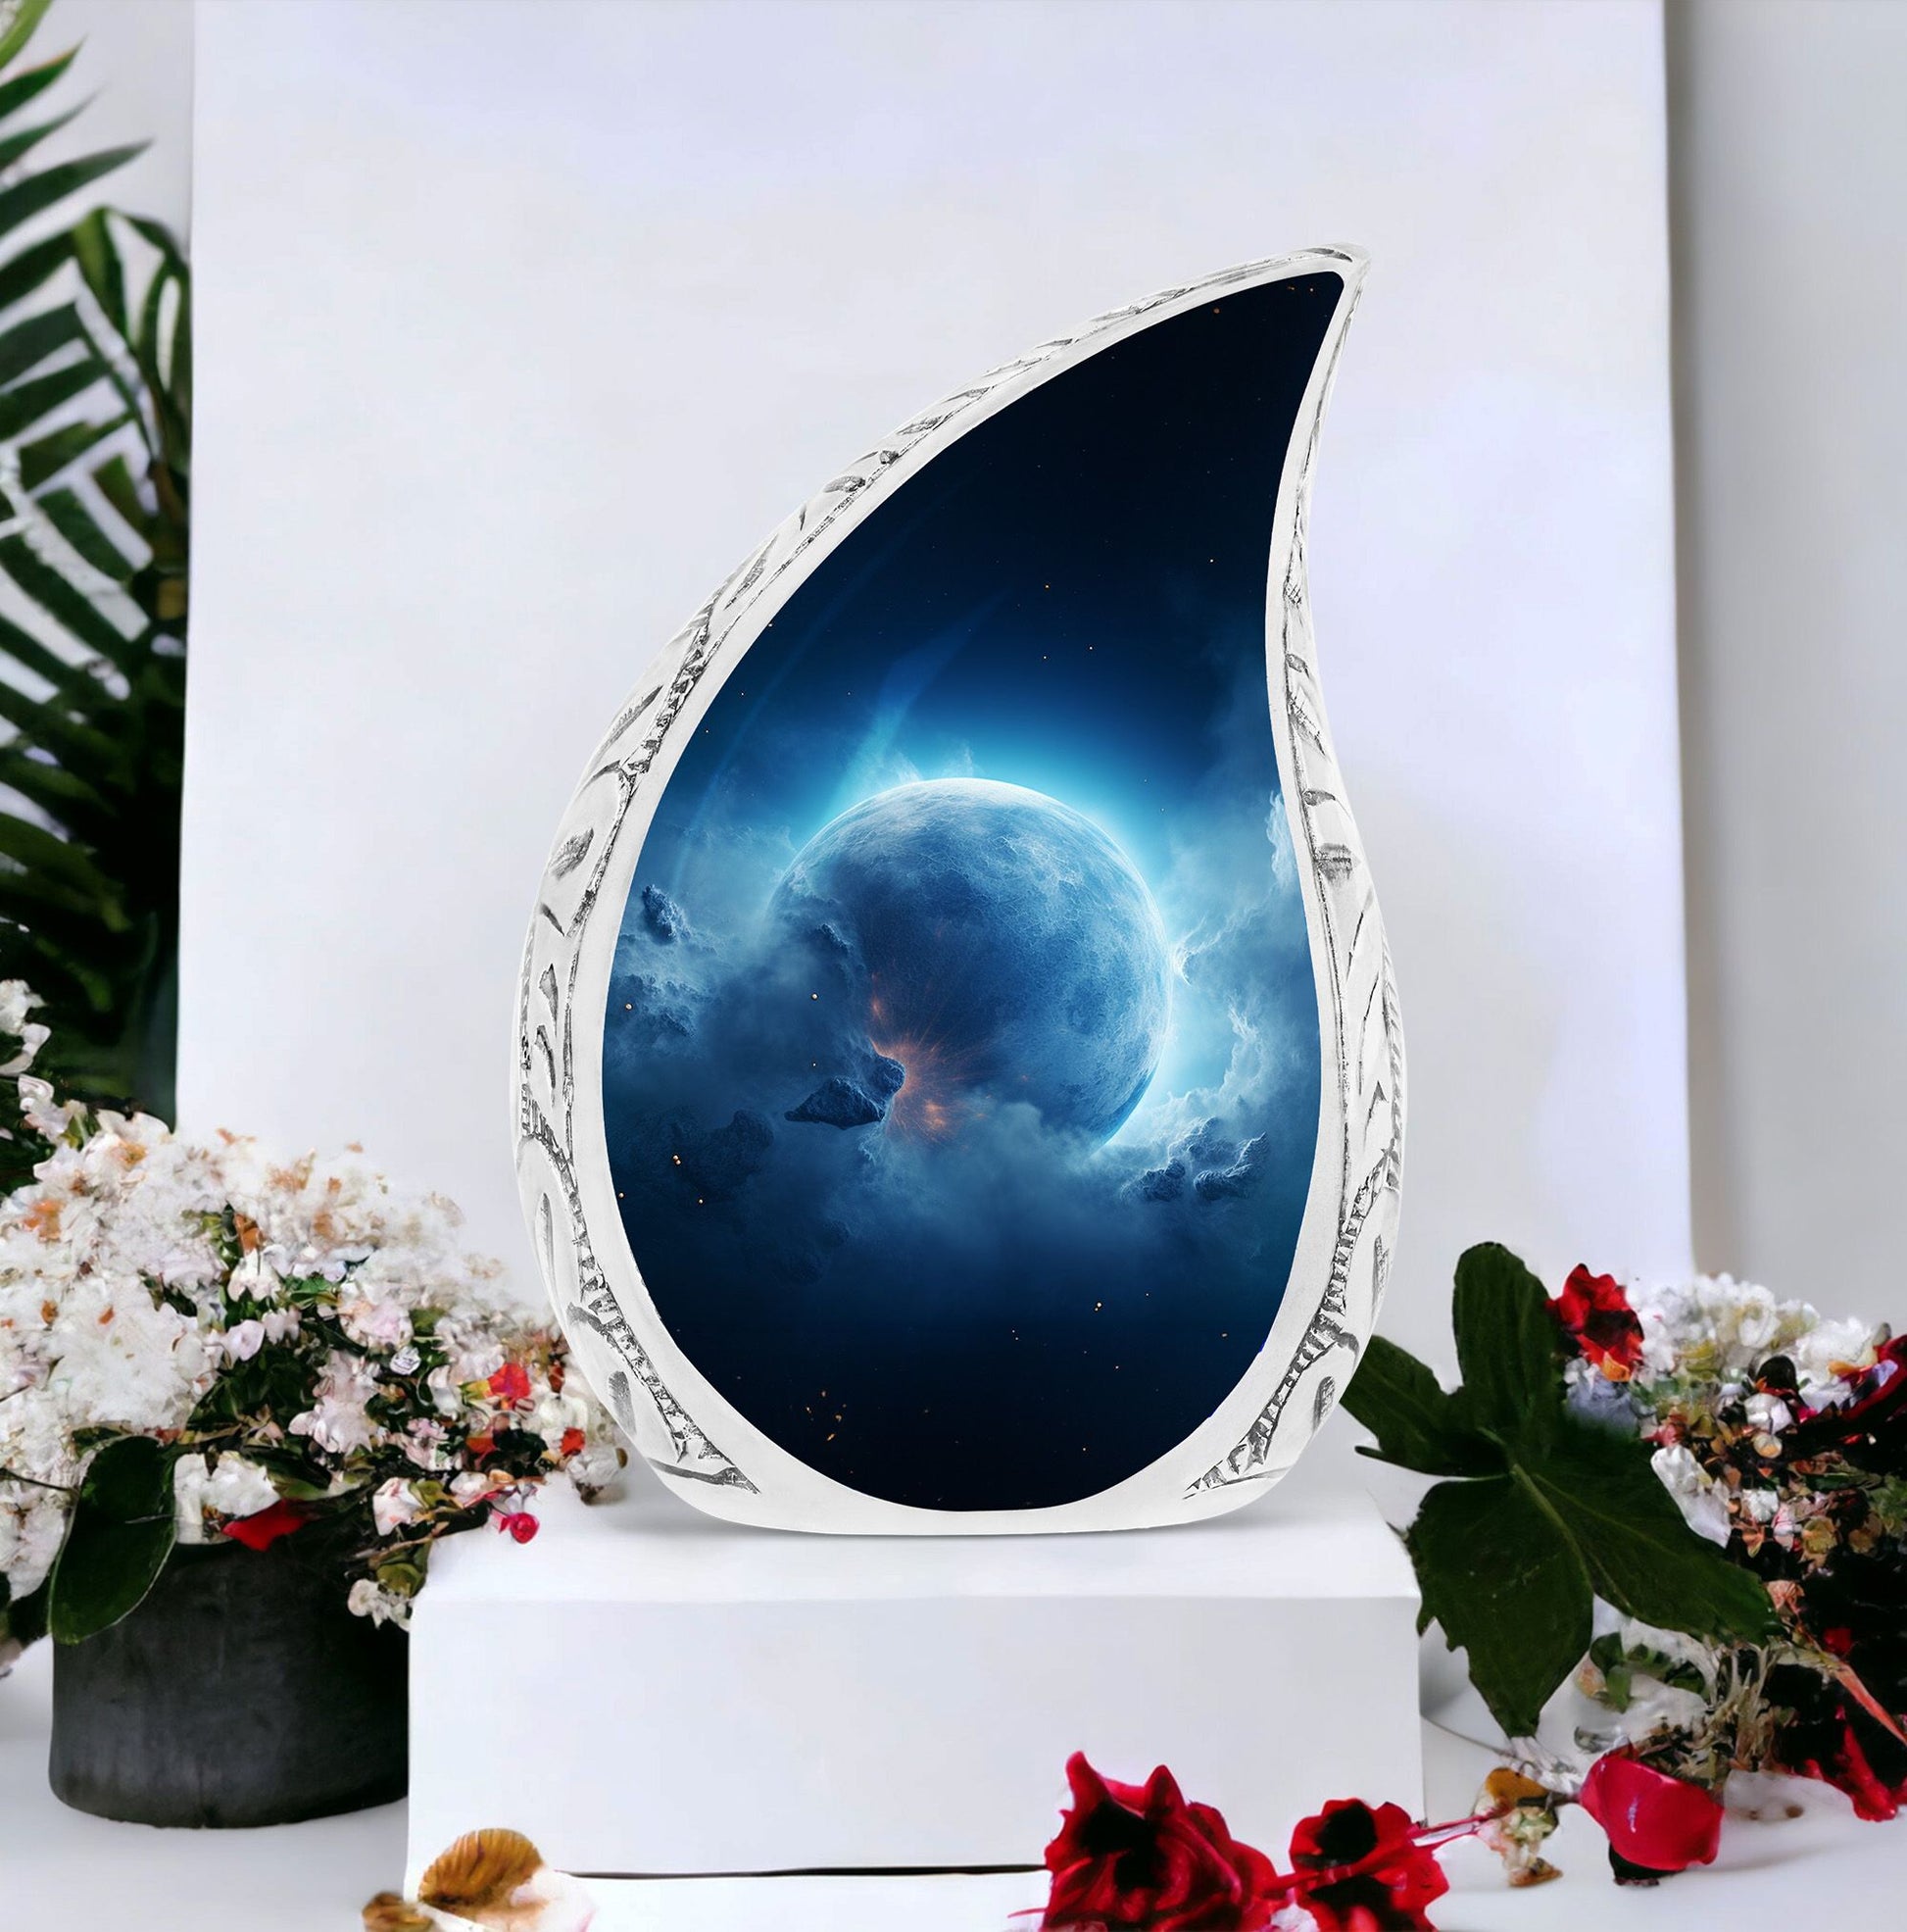 Large Celestial Awakening funeral urn, suitable as an Adult Male Urn for Ashes or Perfect Memorials Urn.